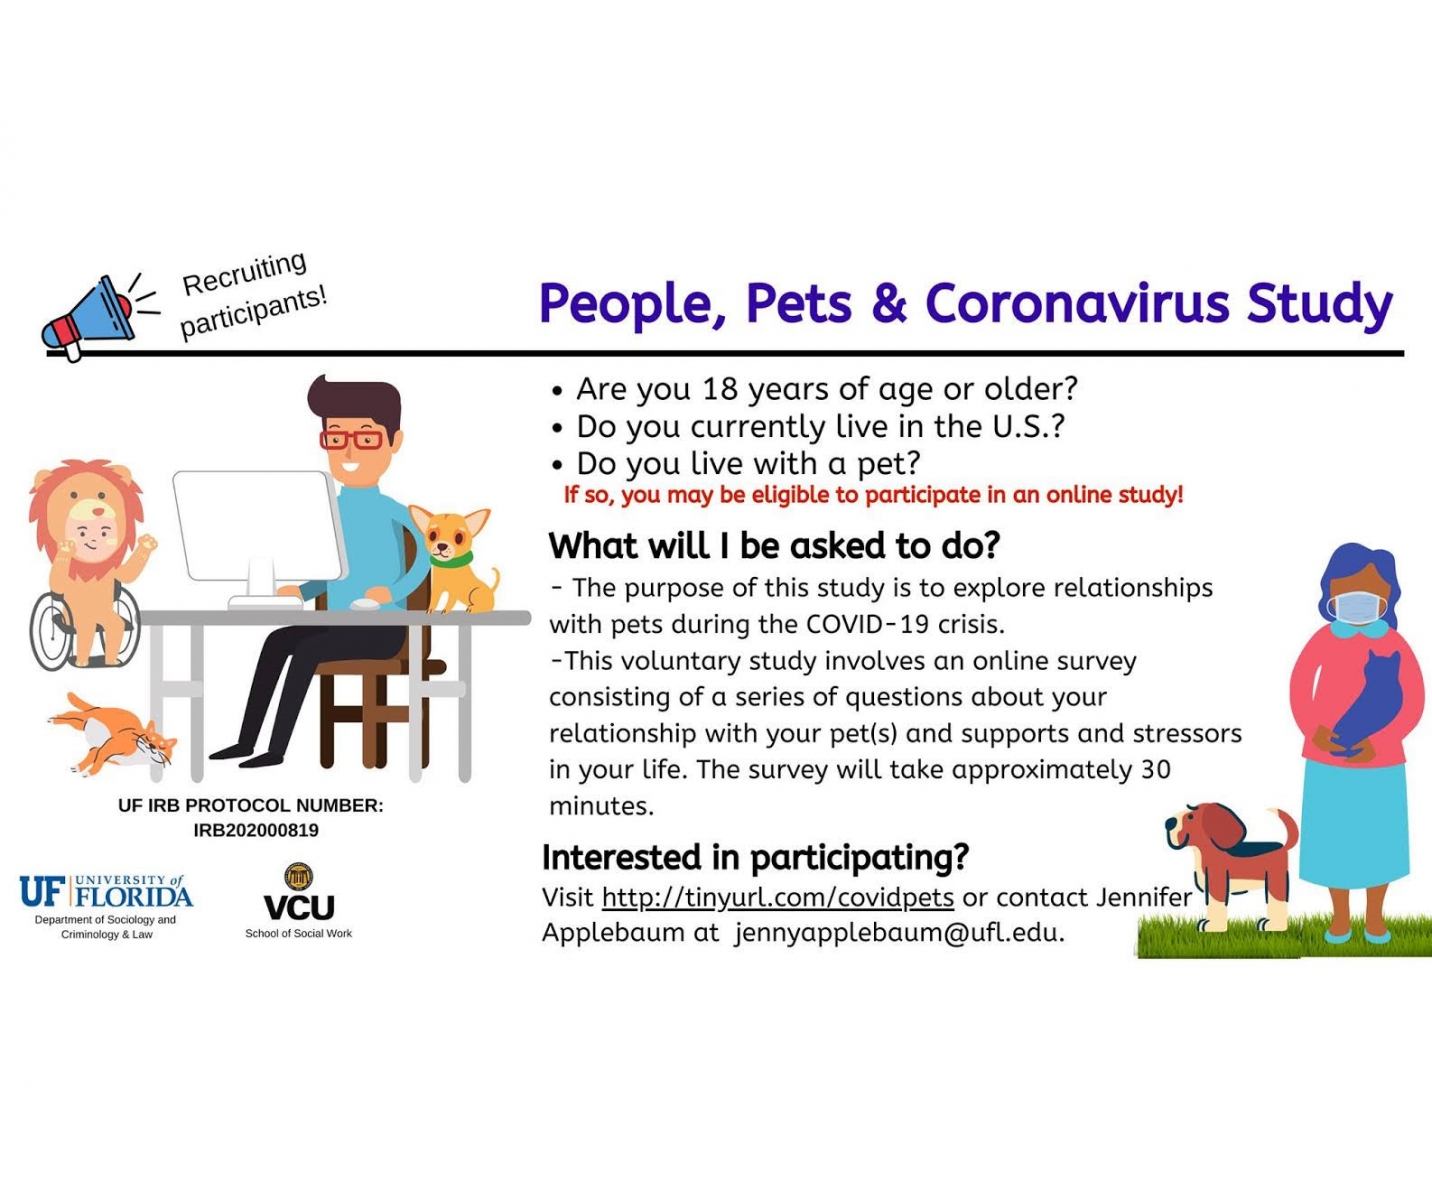 How Is Your Relationship With Your Pets During COVID-19 Pandemic?